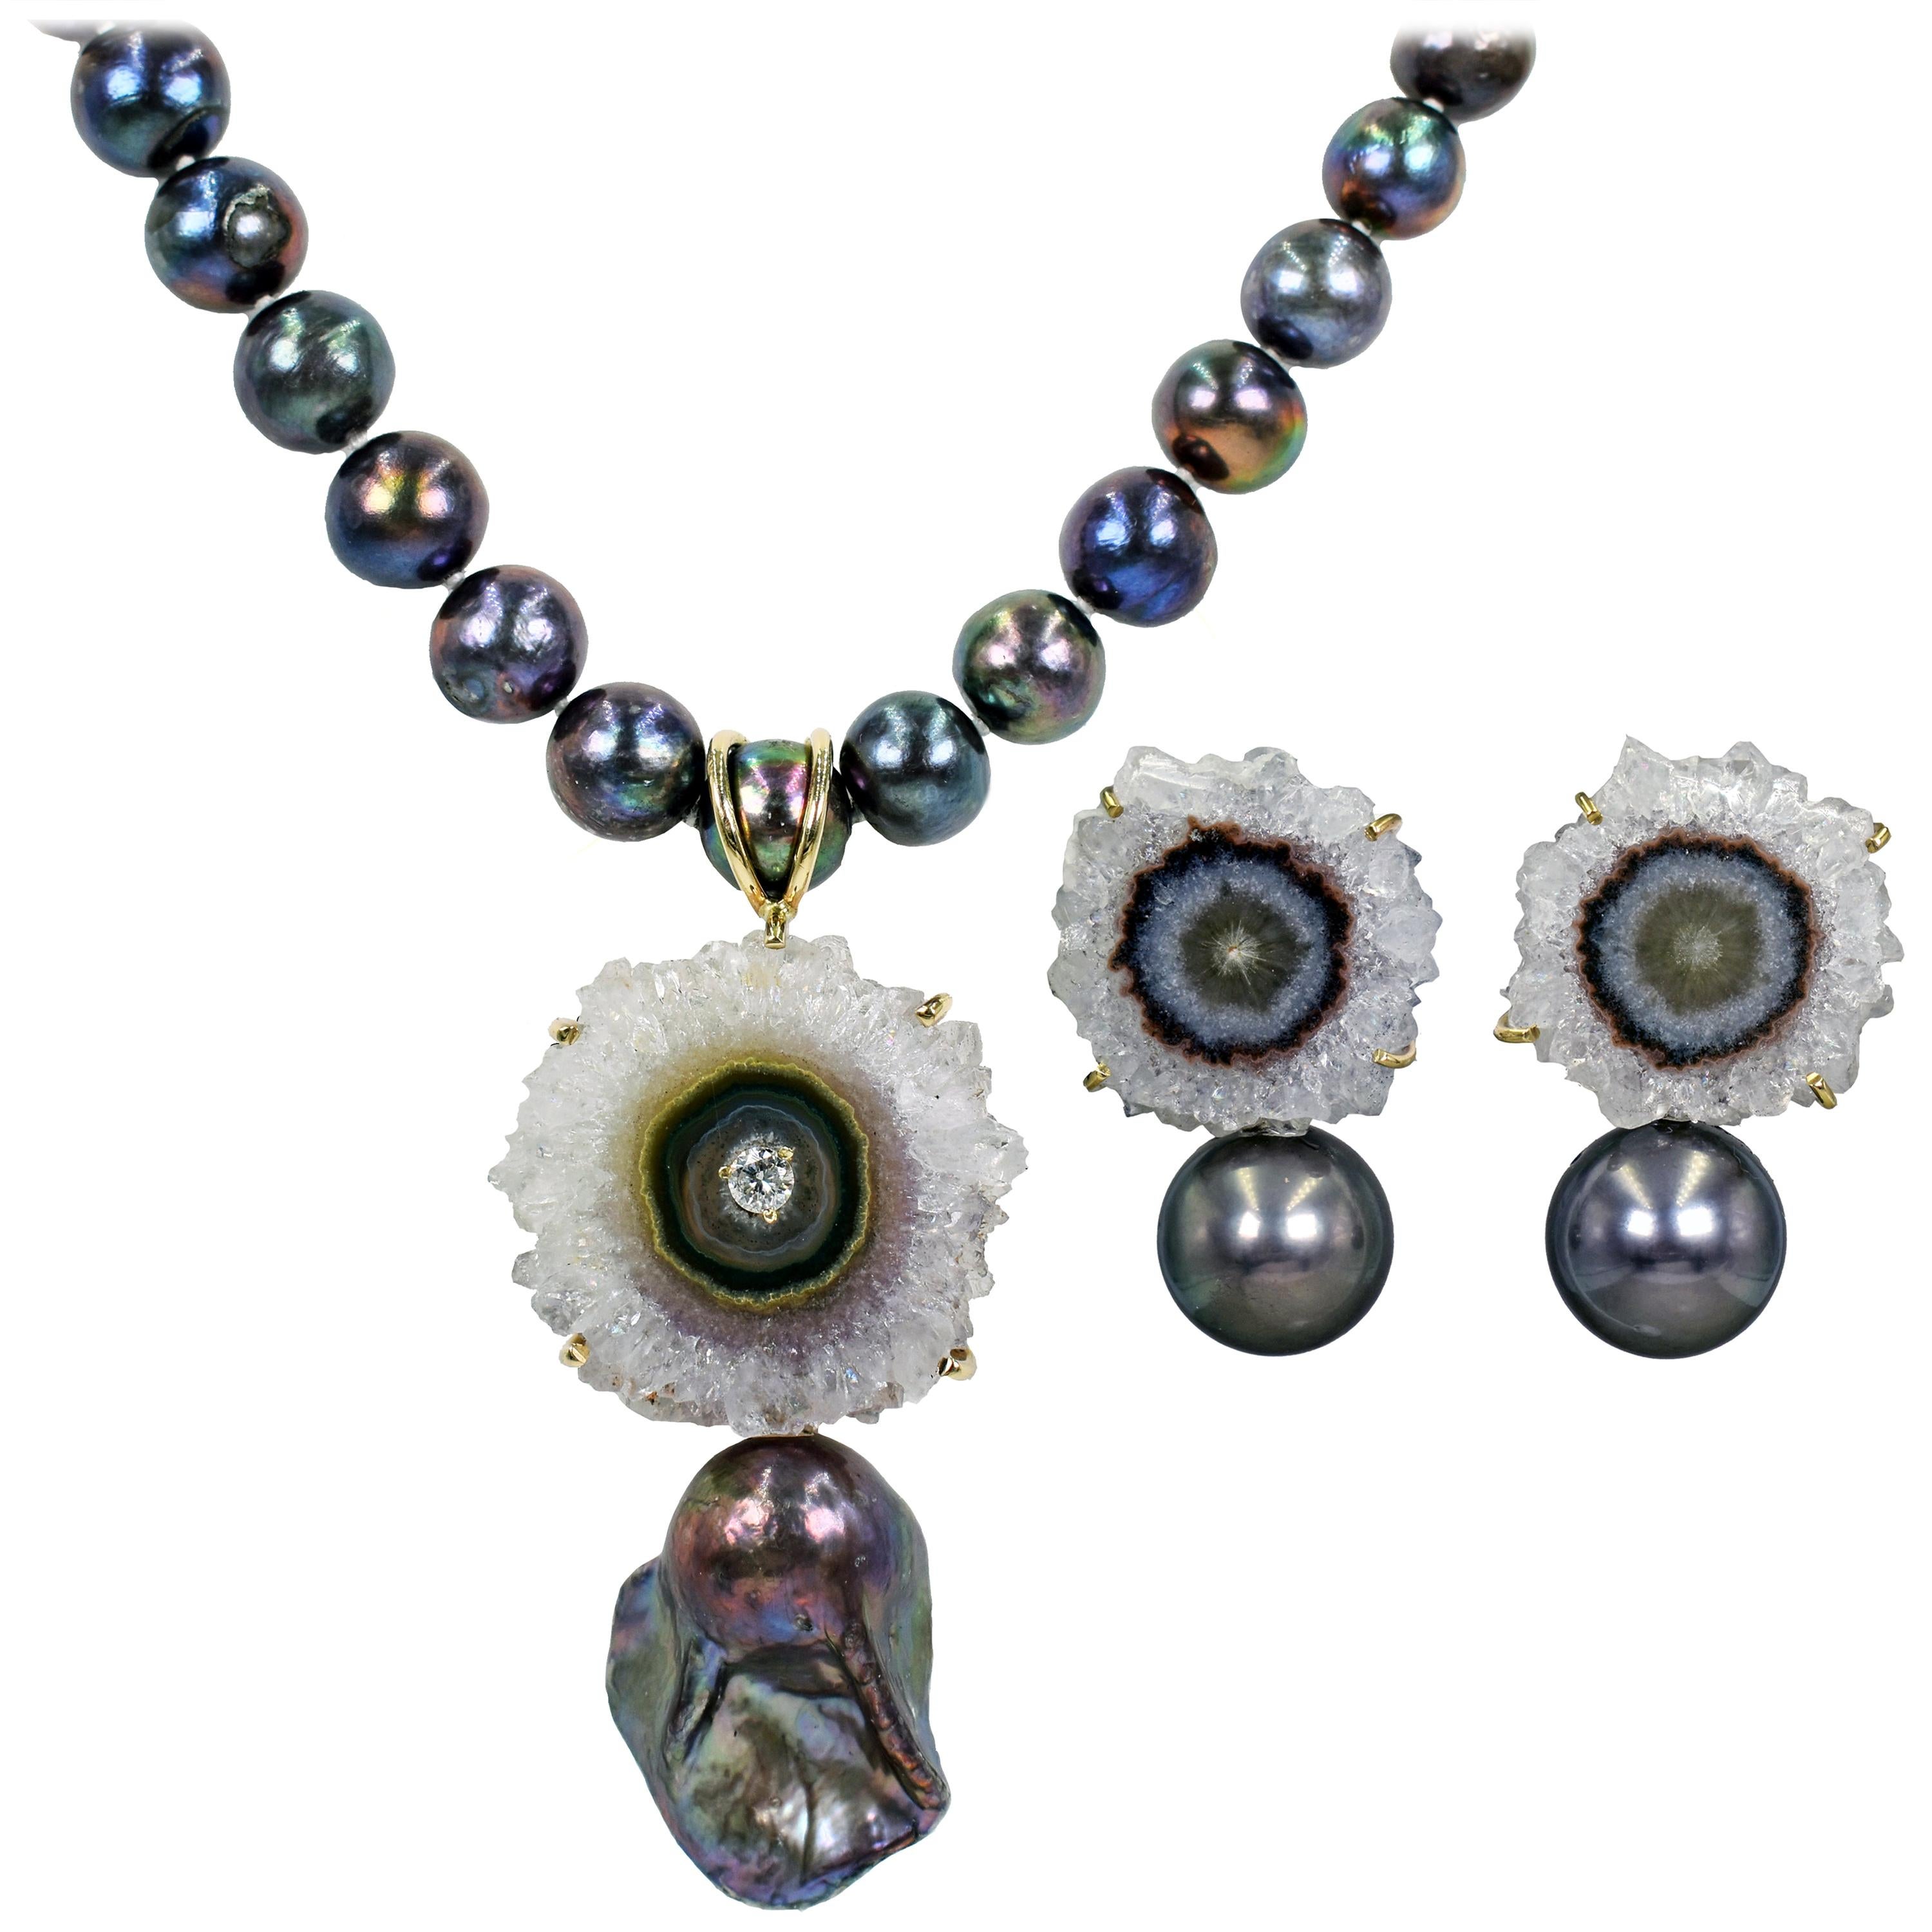 Amethyst Stalactite and Black Pearl Stud Earrings and Pendant Necklace Set